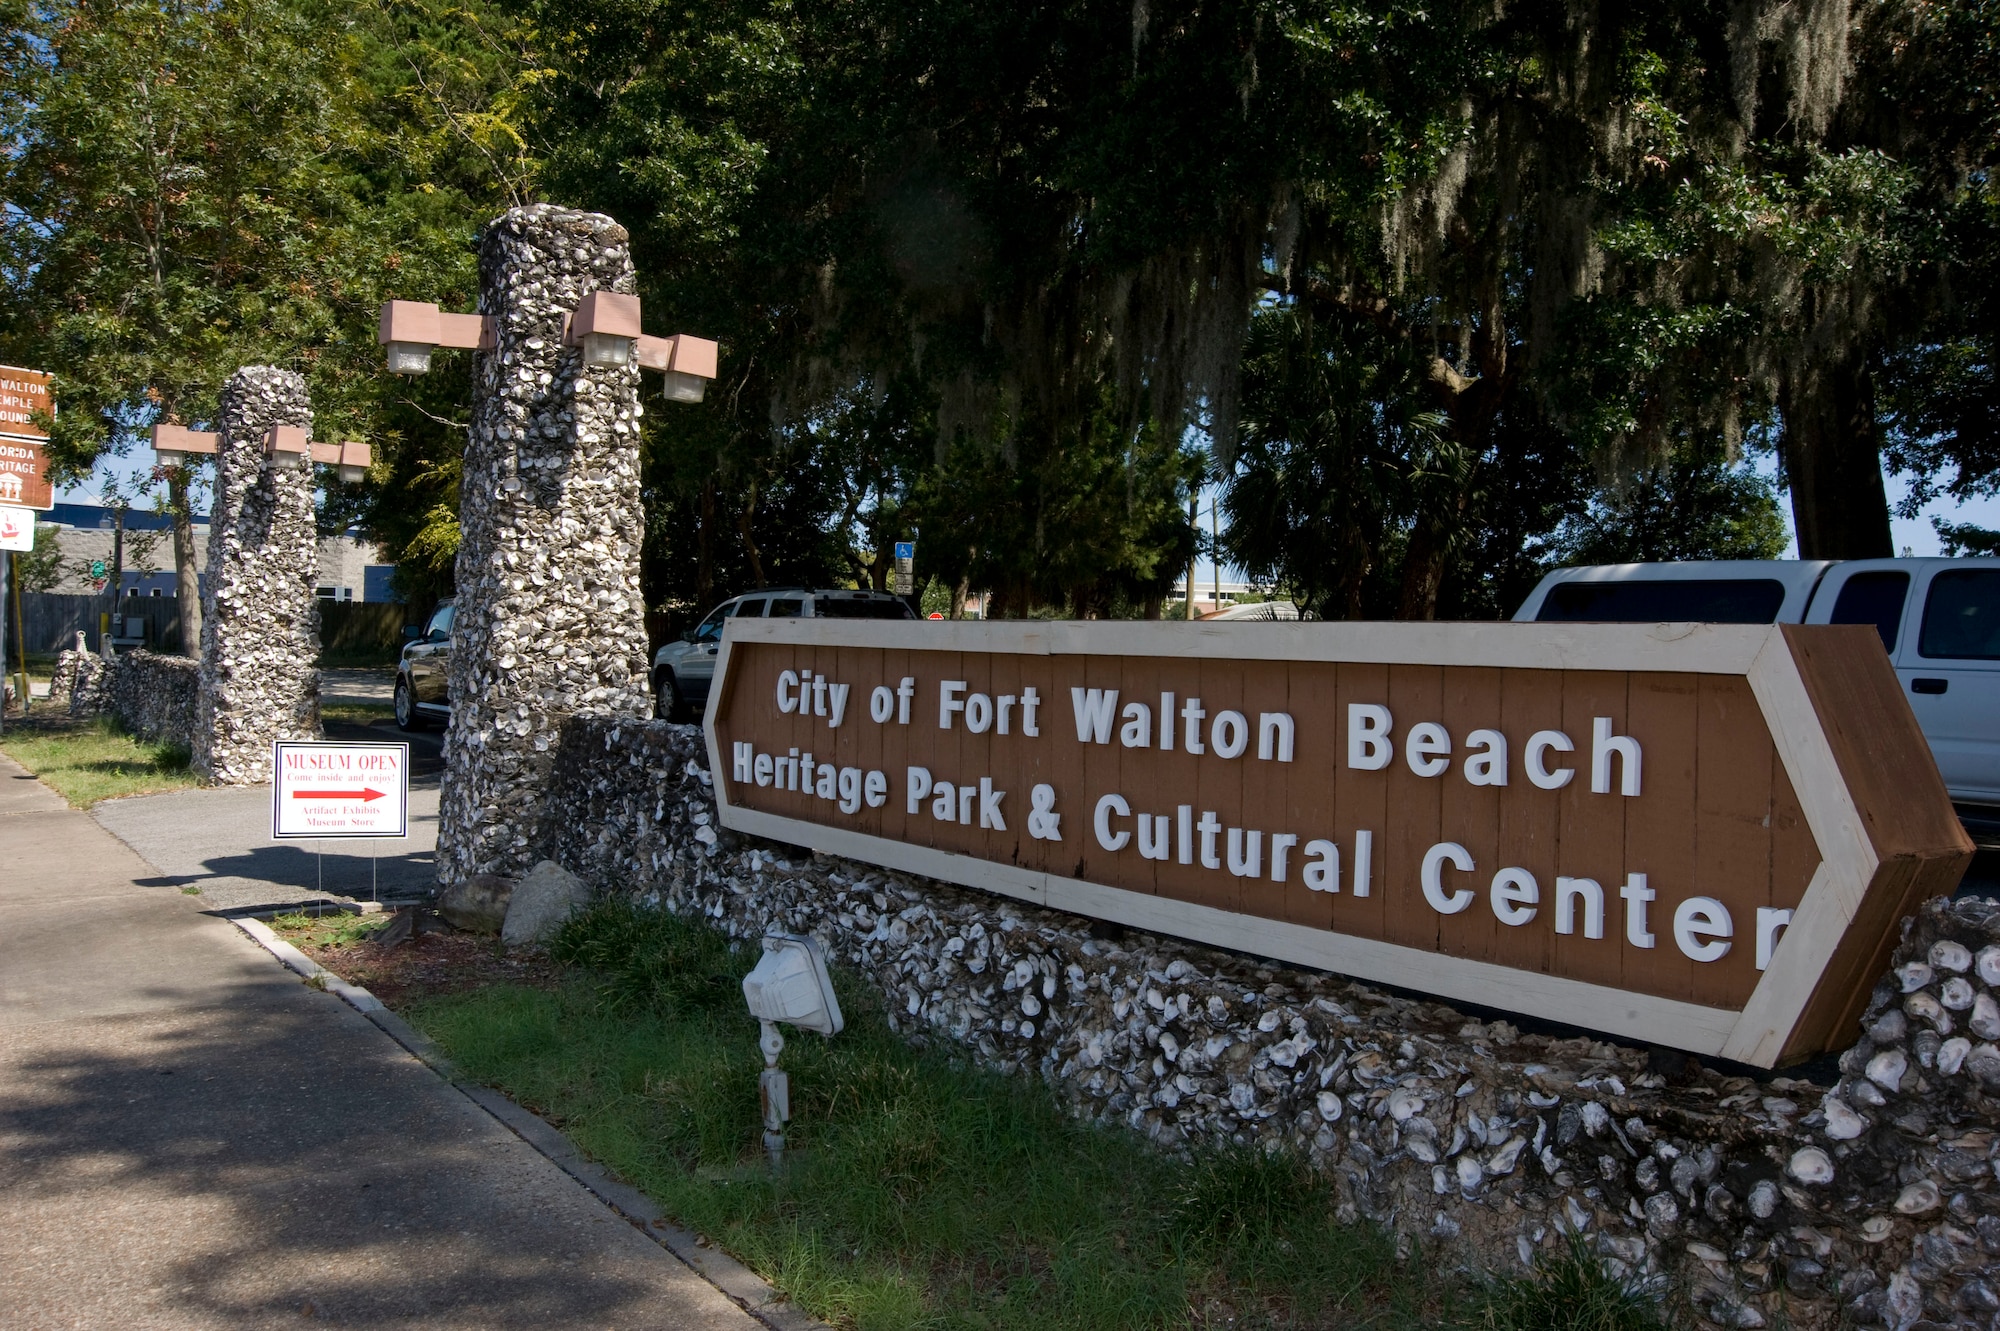 The Heritage Park & Cultural Center is located at 139 Miracle Strip Pkwy SE in Fort Walton Beach, Fla. (U.S. Air Force photo / Airman 1st Class Andrea Posey)